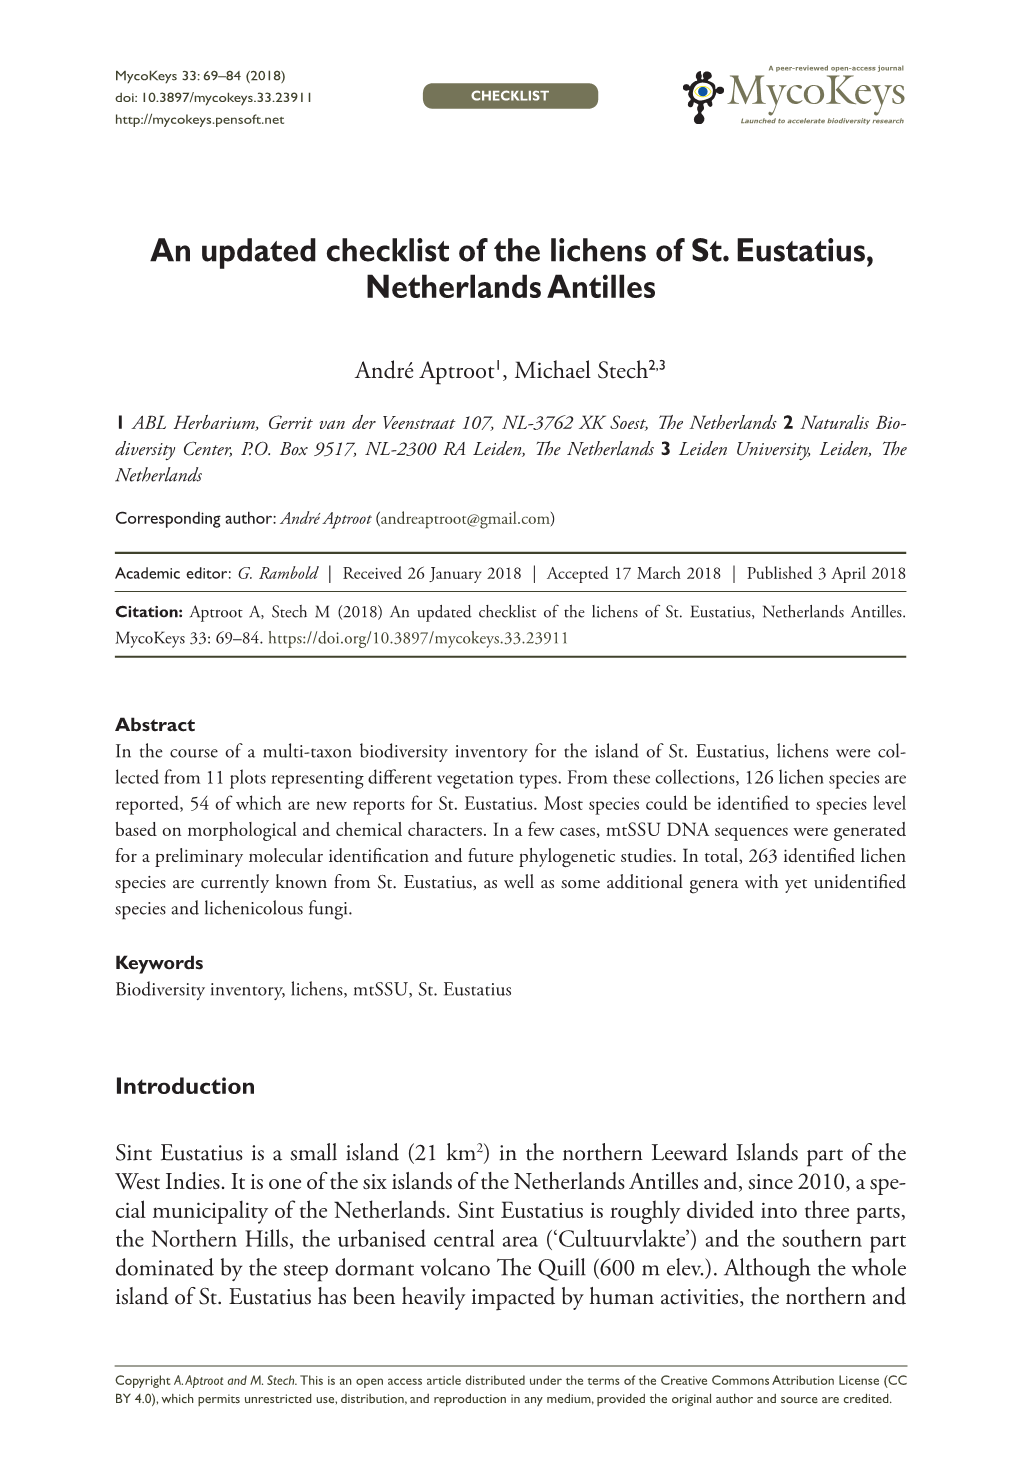 ﻿An Updated Checklist of the Lichens of St. Eustatius, Netherlands Antilles